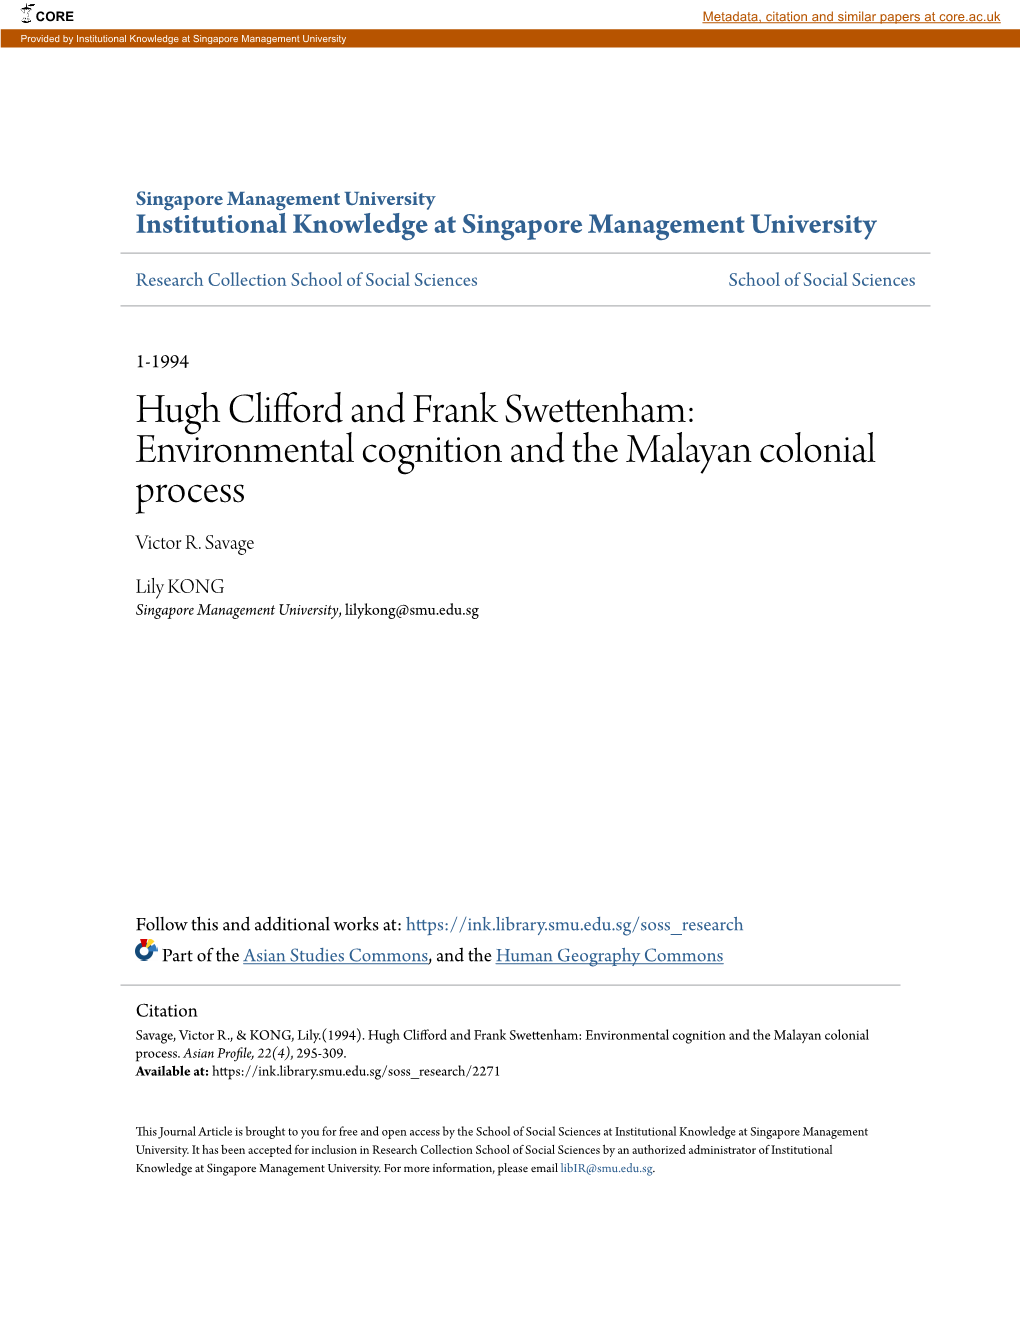 Hugh Clifford and Frank Swettenham: Environmental Cognition and the Malayan Colonial Process Victor R